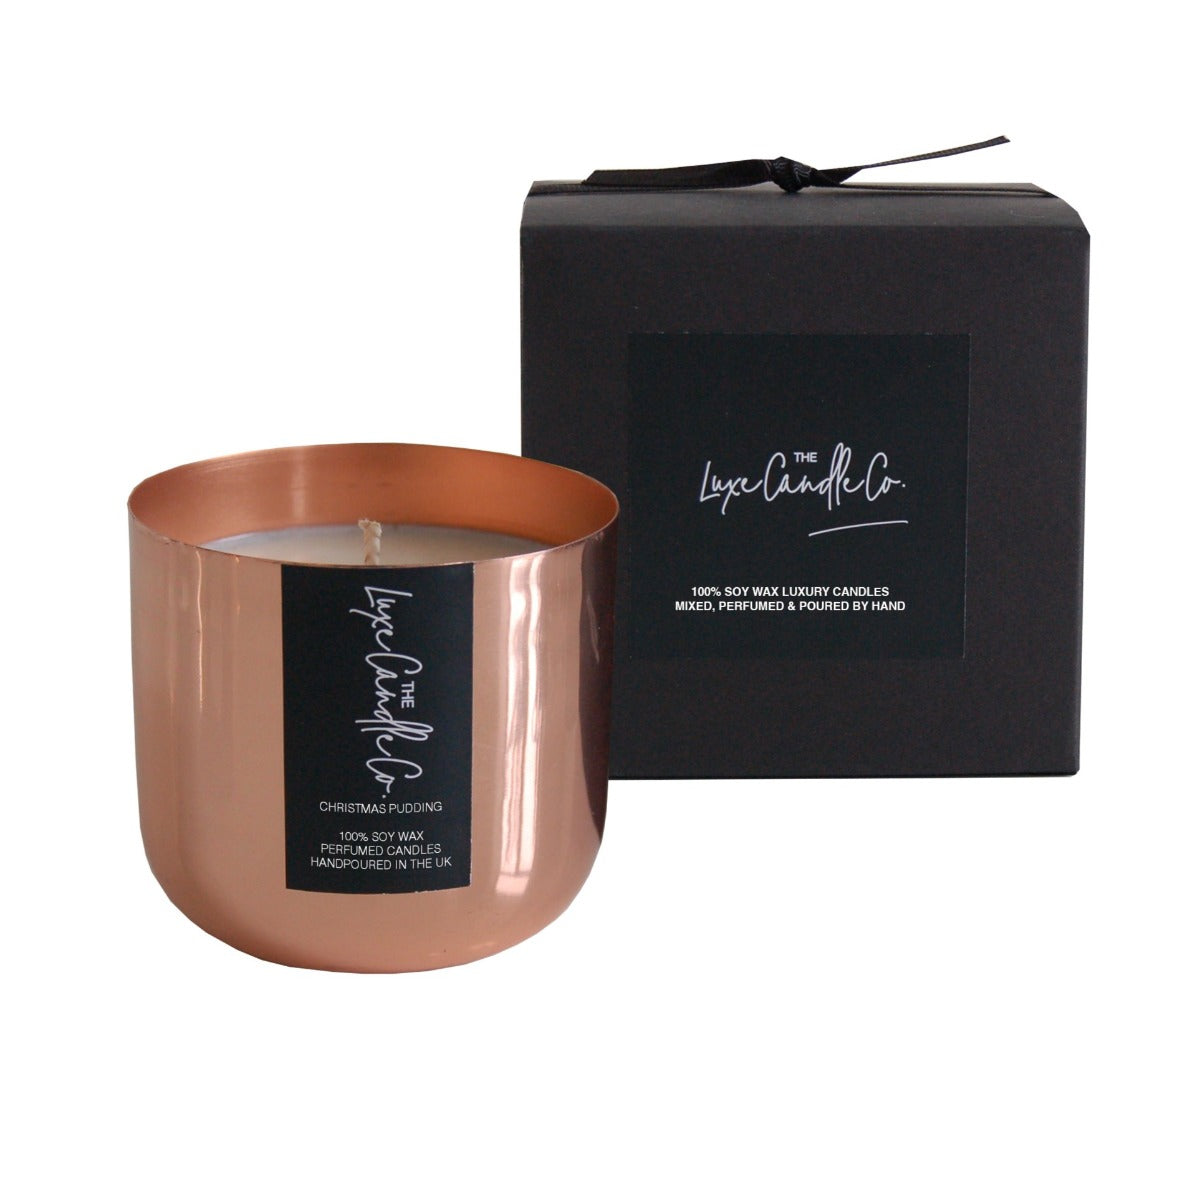 Copper Christmas Pudding scented soy wax candle | by The Luxe Candle Co